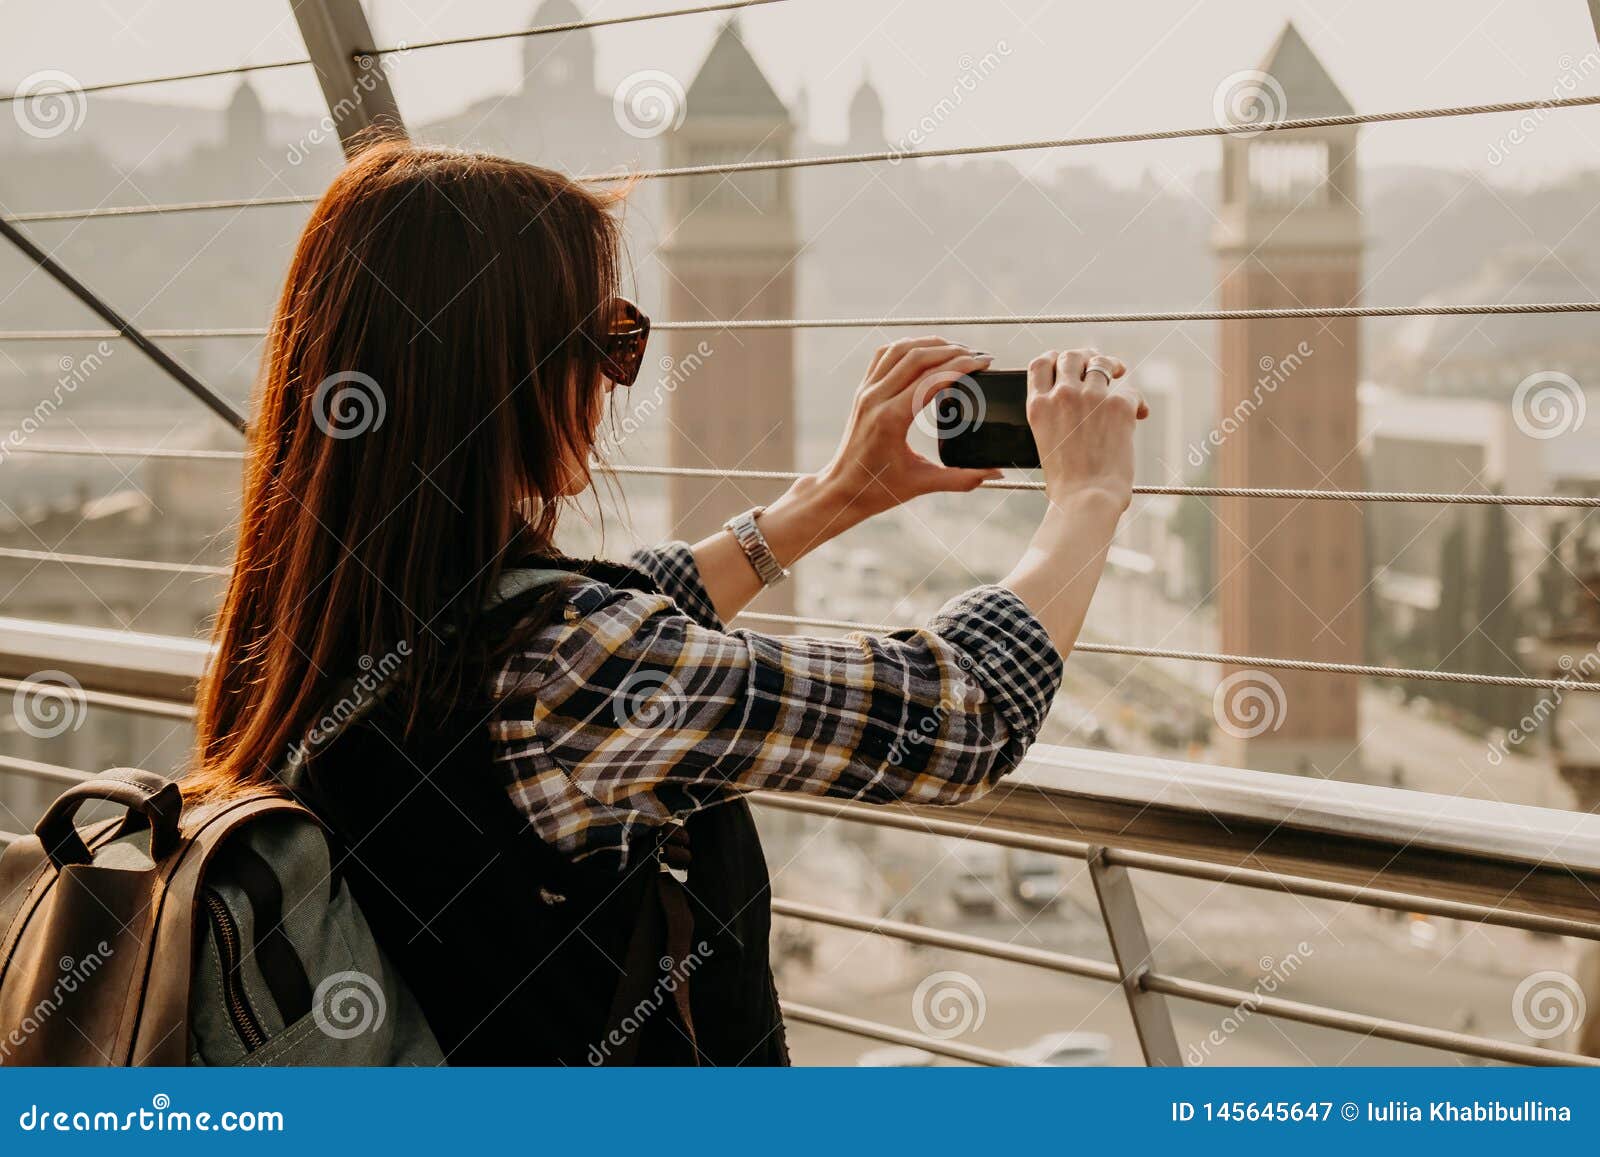 Young Girl With Long Brown Hair Standing On View Point And Taking A